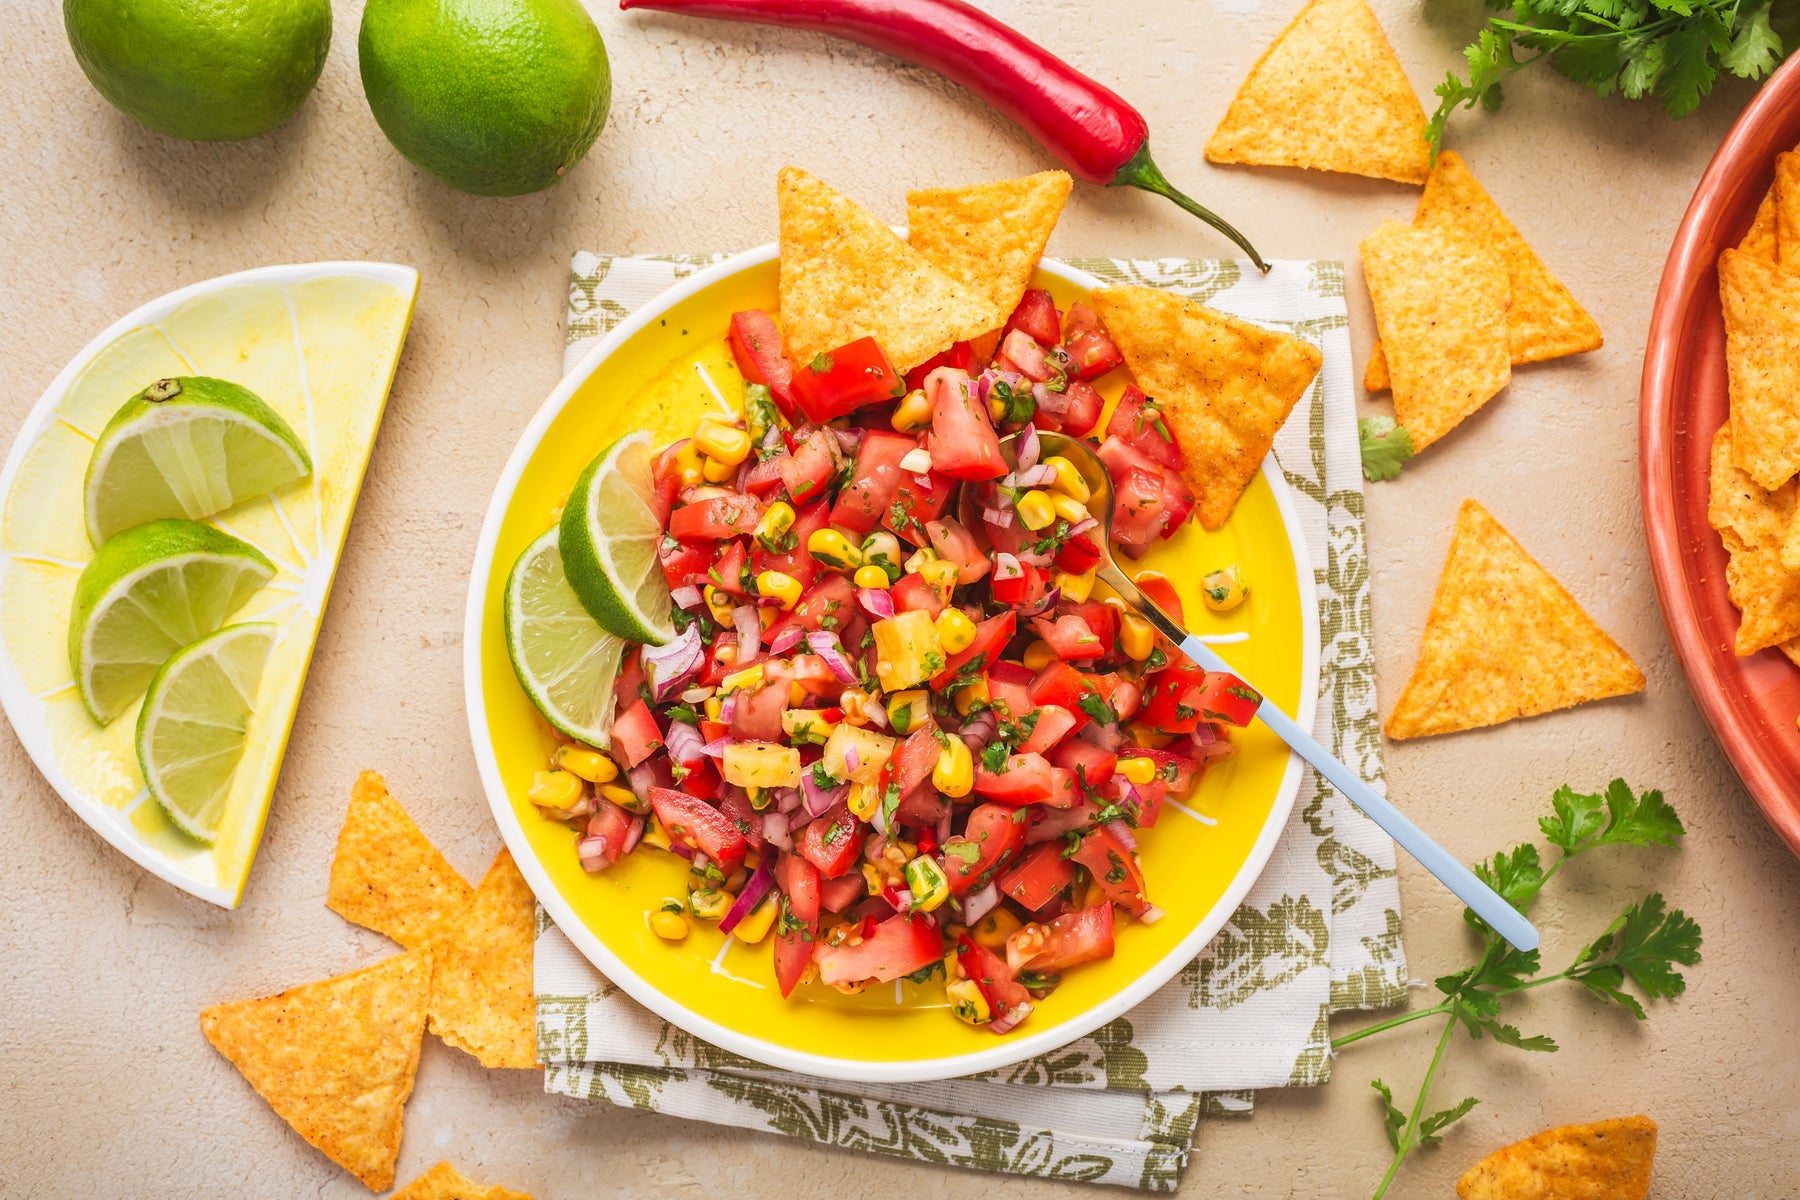 How to Make Homemade Fresh Salsa and Tortilla Chips